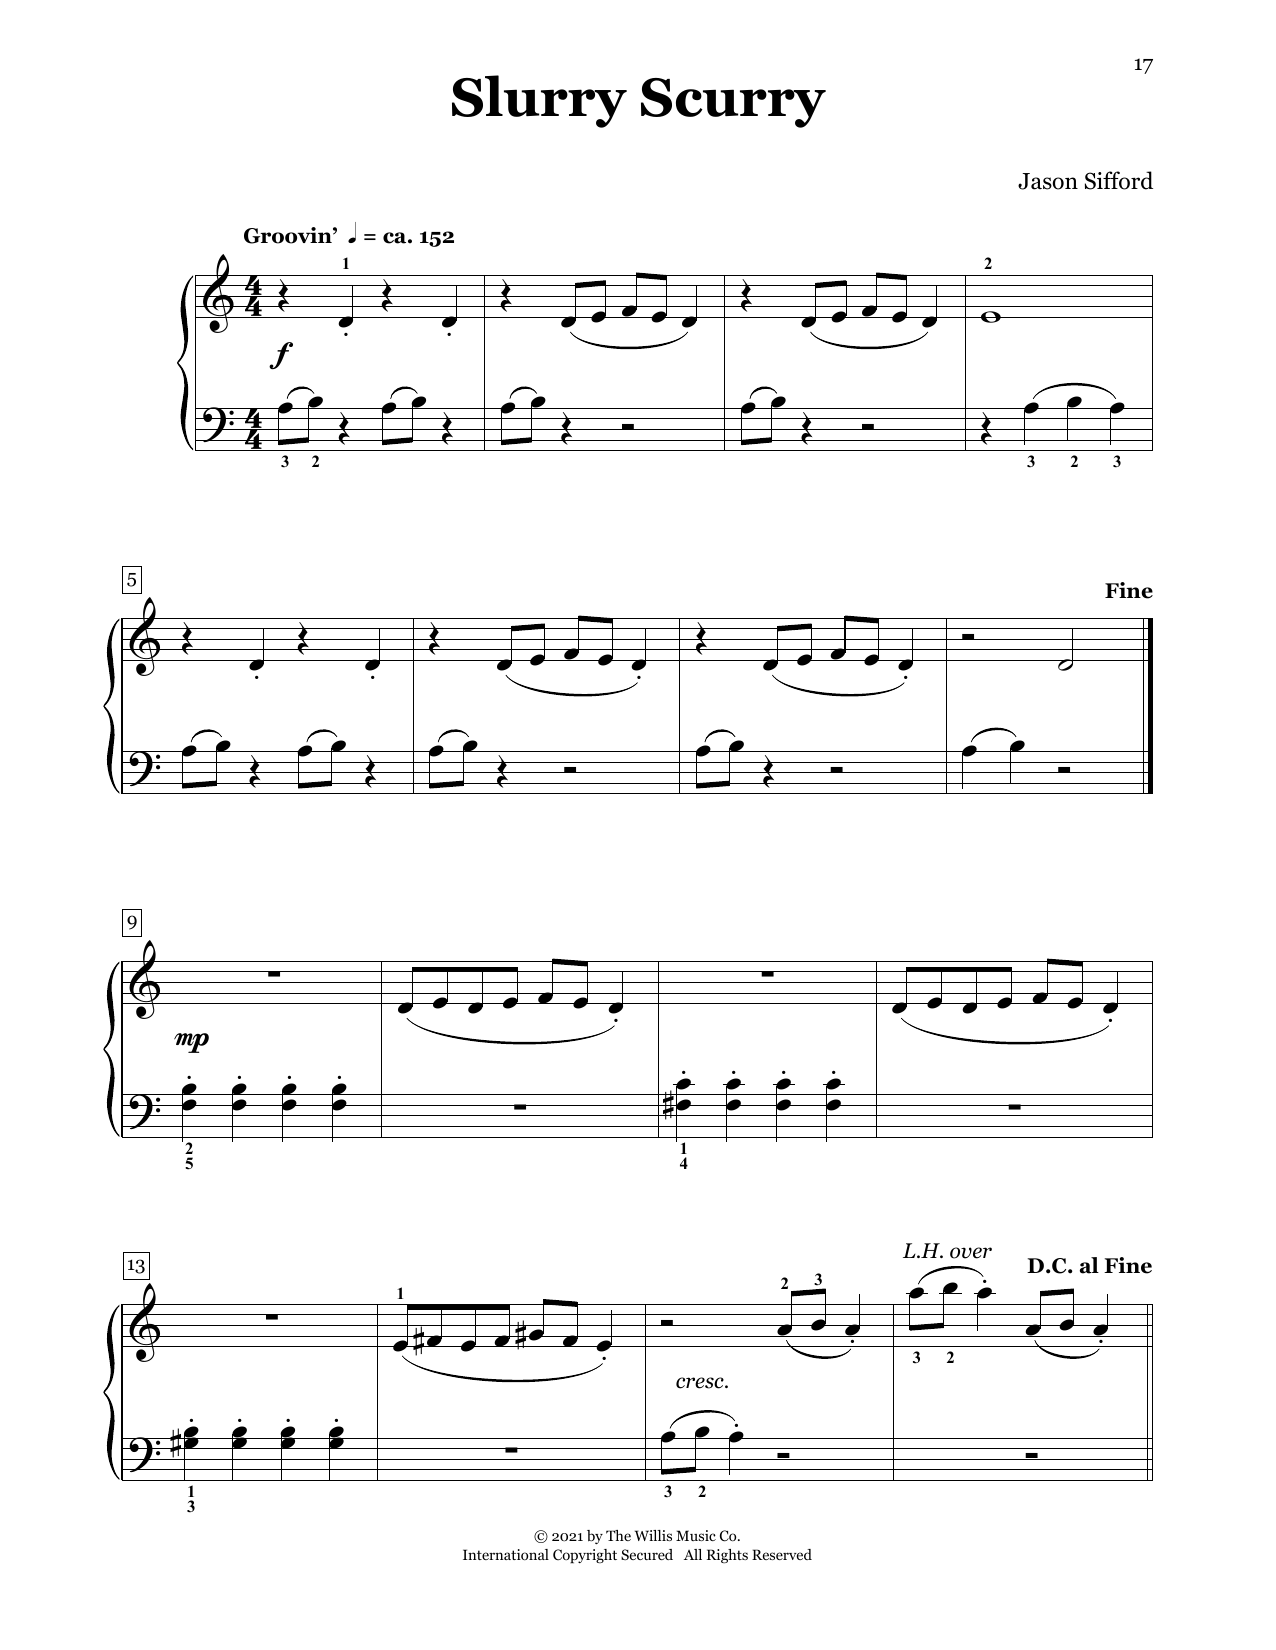 Download Jason Sifford Slurry Scurry Sheet Music